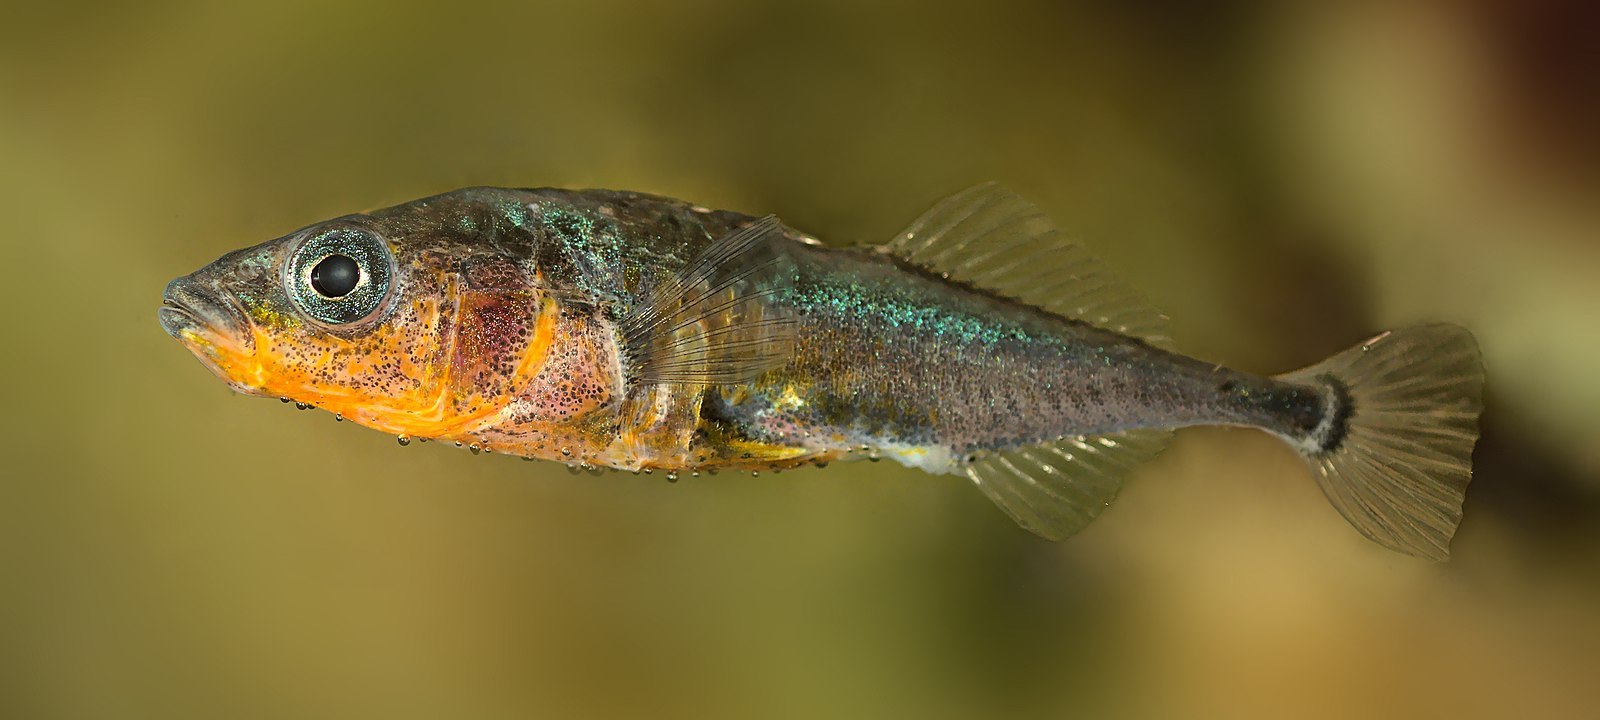 Threespine stickleback (*Gasterosteus aculeatus*). Photo by Gilles San Martin, [CC BY-SA 2.0](https://creativecommons.org/licenses/by-sa/2.0), via Wikimedia Commons